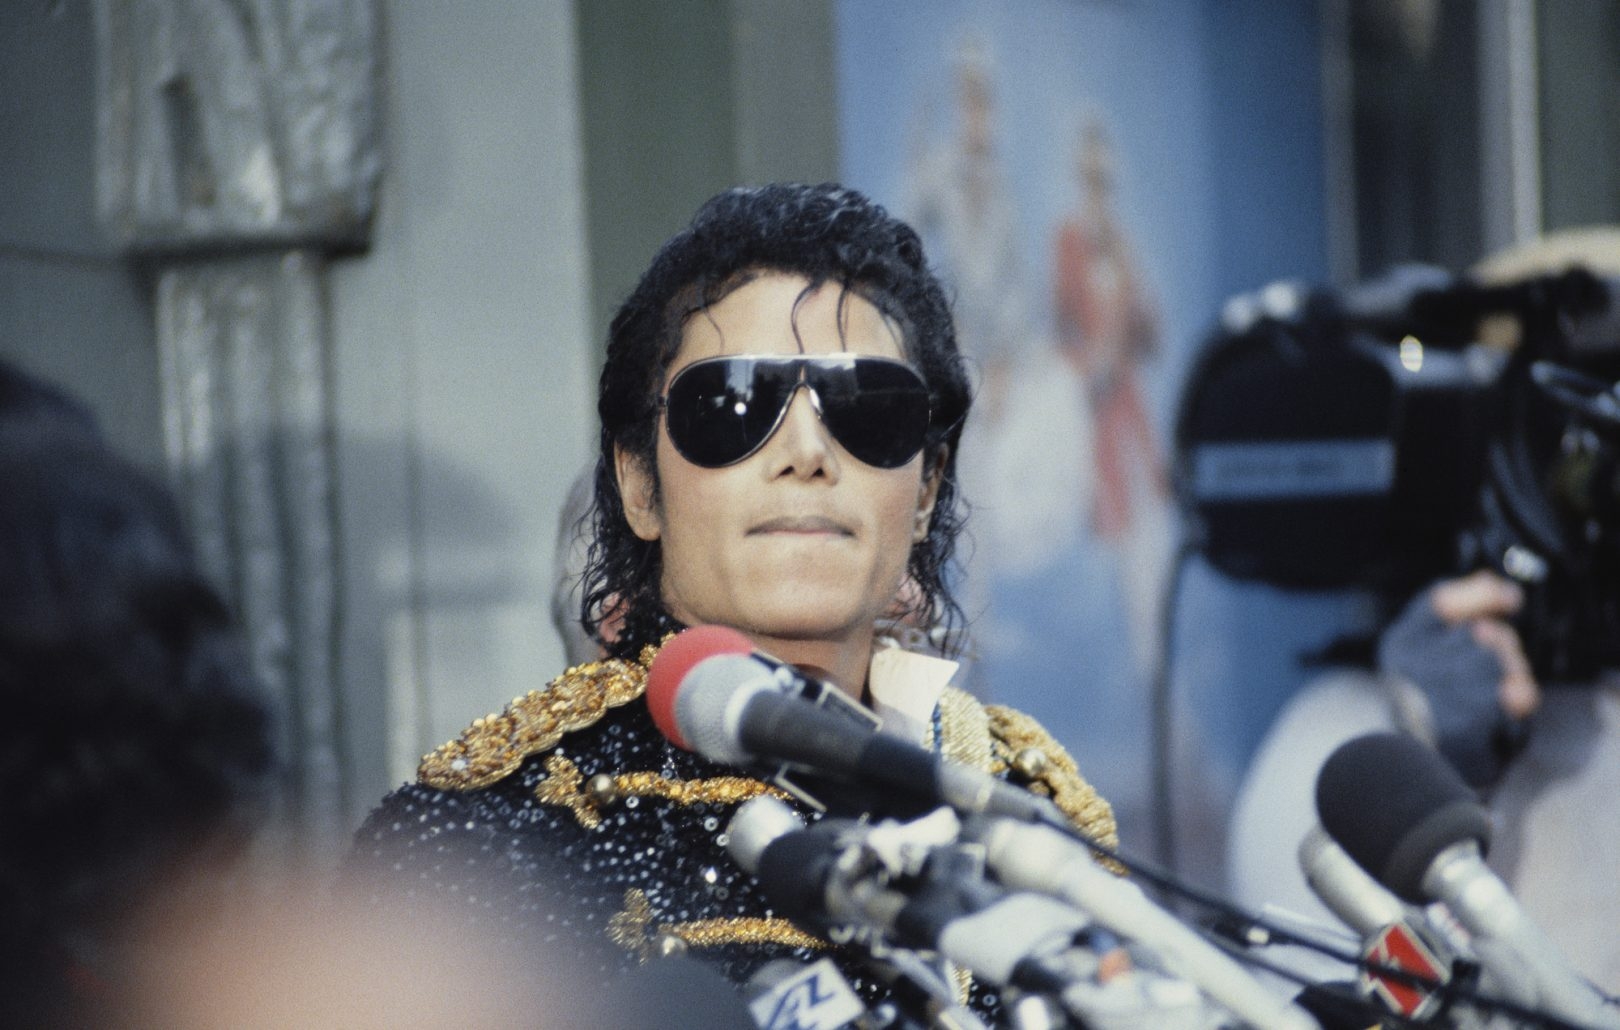 Michael Jackson Credit: Bill Nation/Sygma via Getty Images